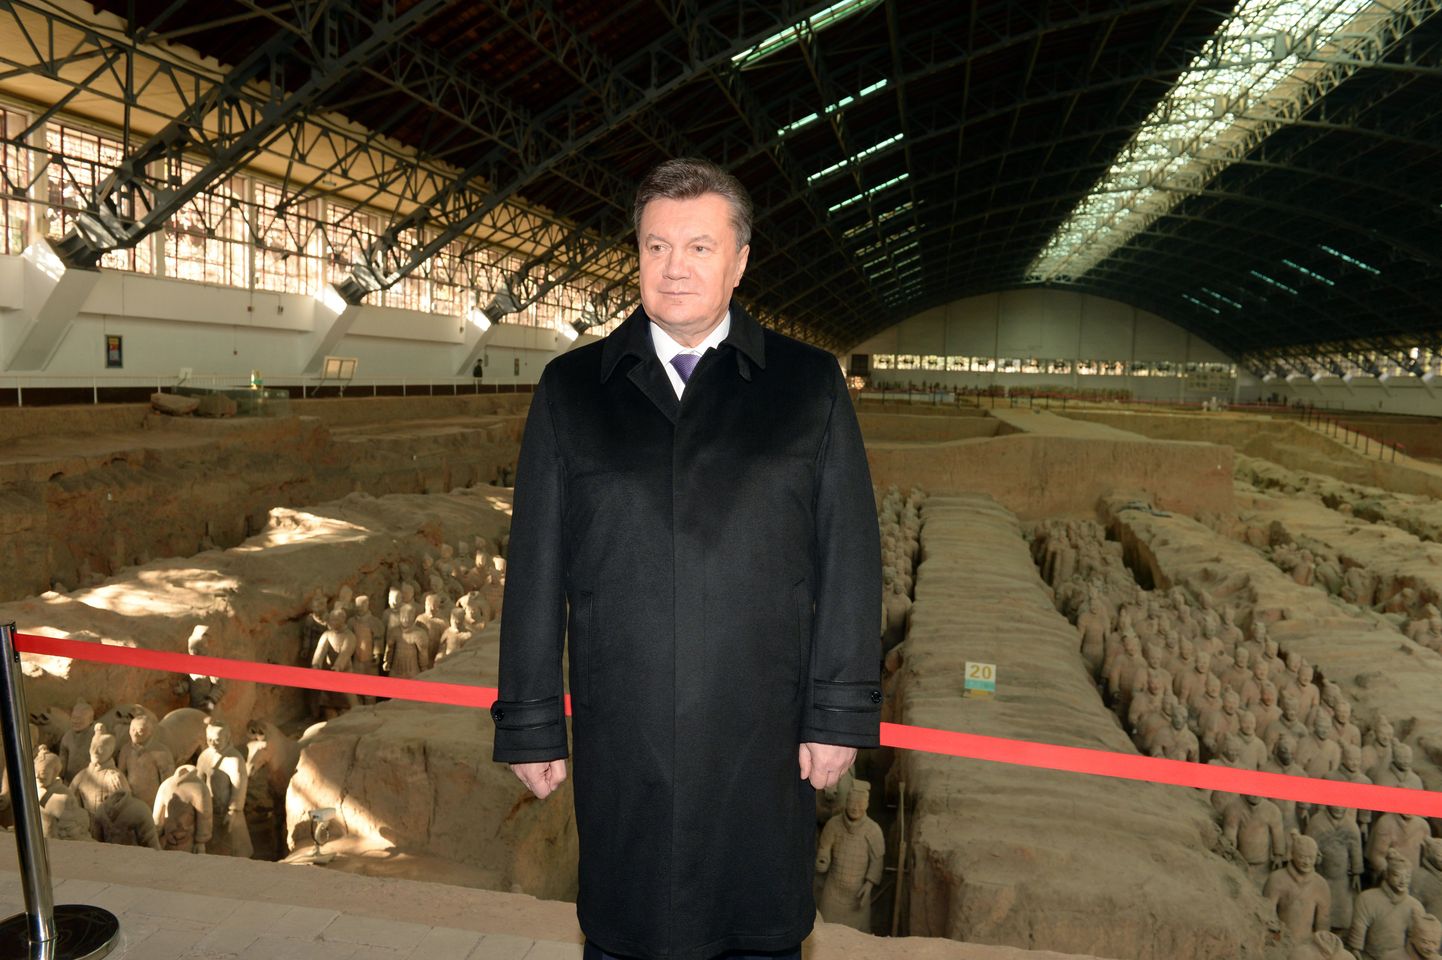 Ukraine's President Viktor Yanukovych poses for a photo before the life-sized sculptures of warriors in Xian, northwest China's Shanxi province on December 4, 2013. Viktor Yanukovych visited China's Terracotta Warriors on December 4, officials said, a respite from street protests at home calling for his resignation.      CHINA OUT  AFP PHOTO